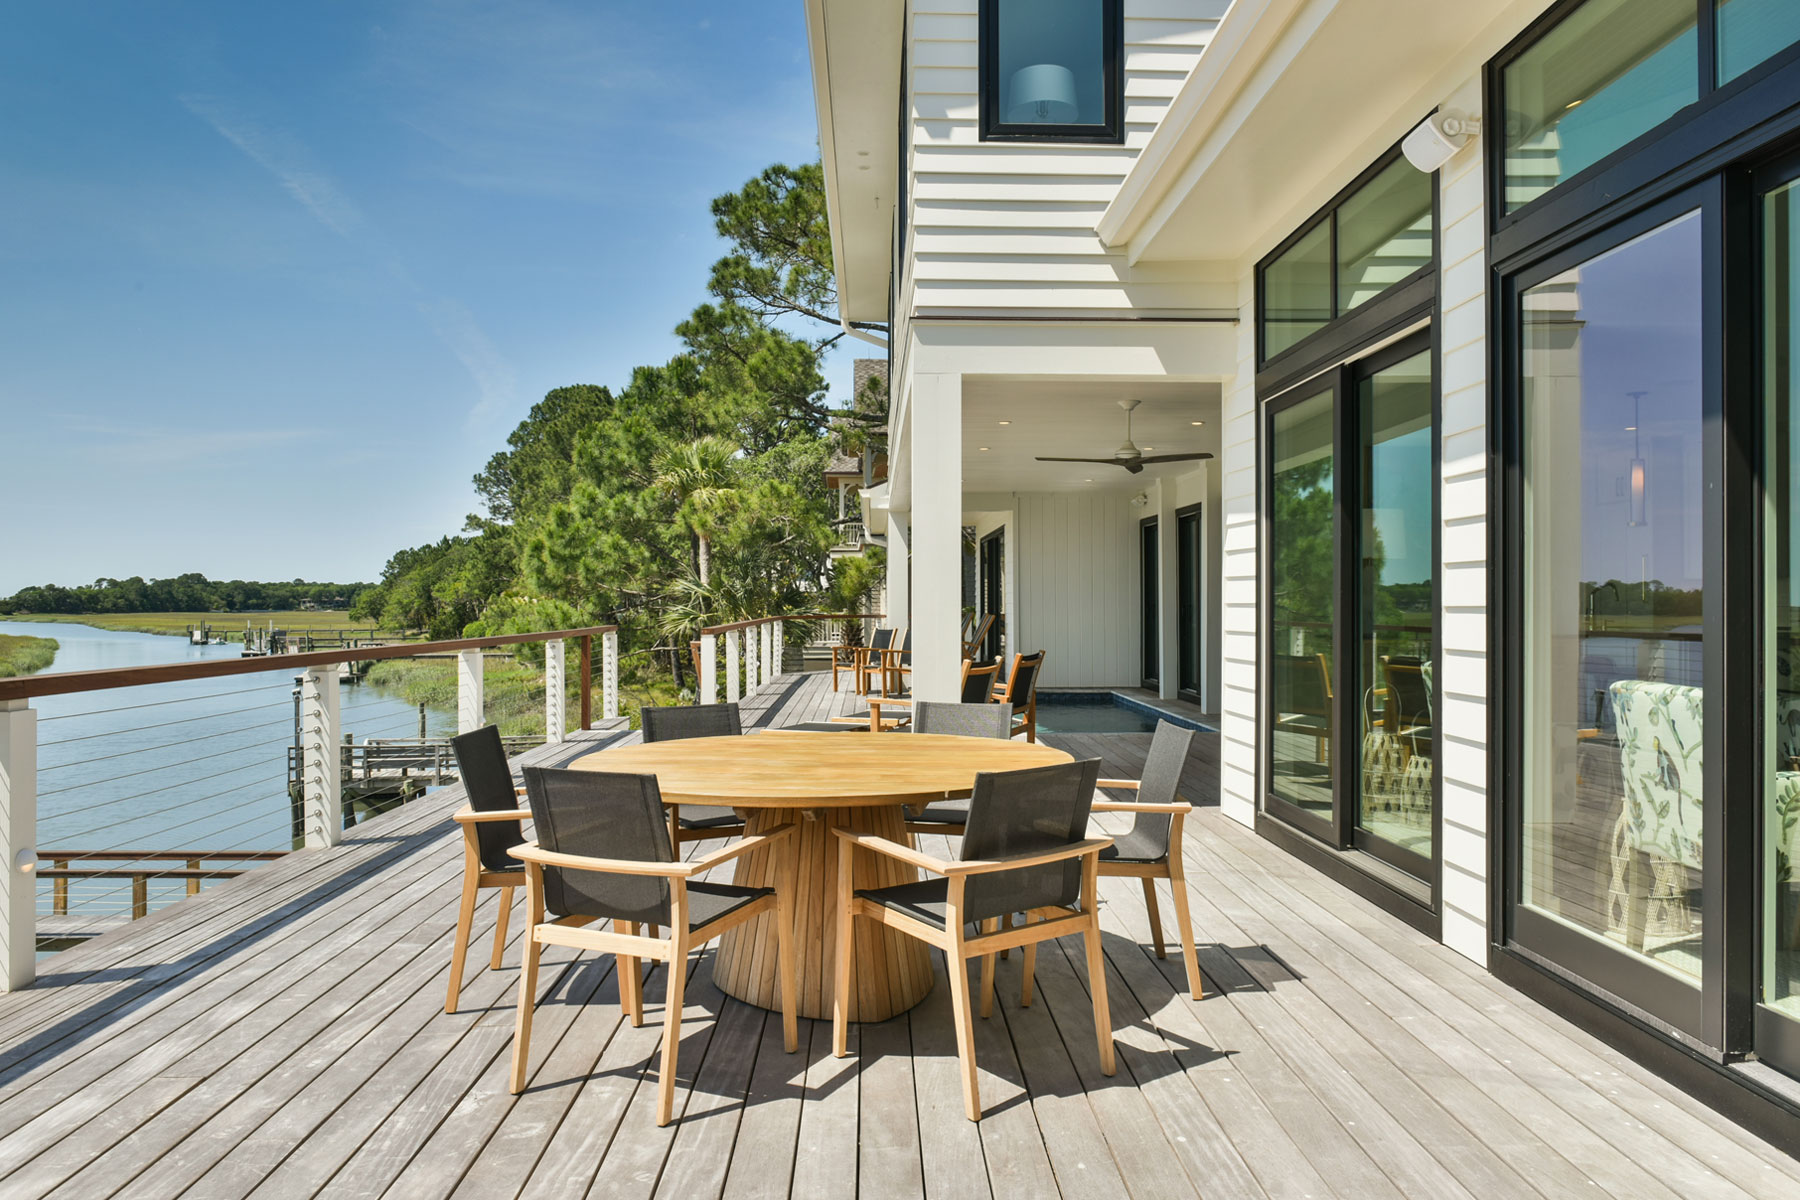 Outdoor dining and entertaining on elevated pool deck